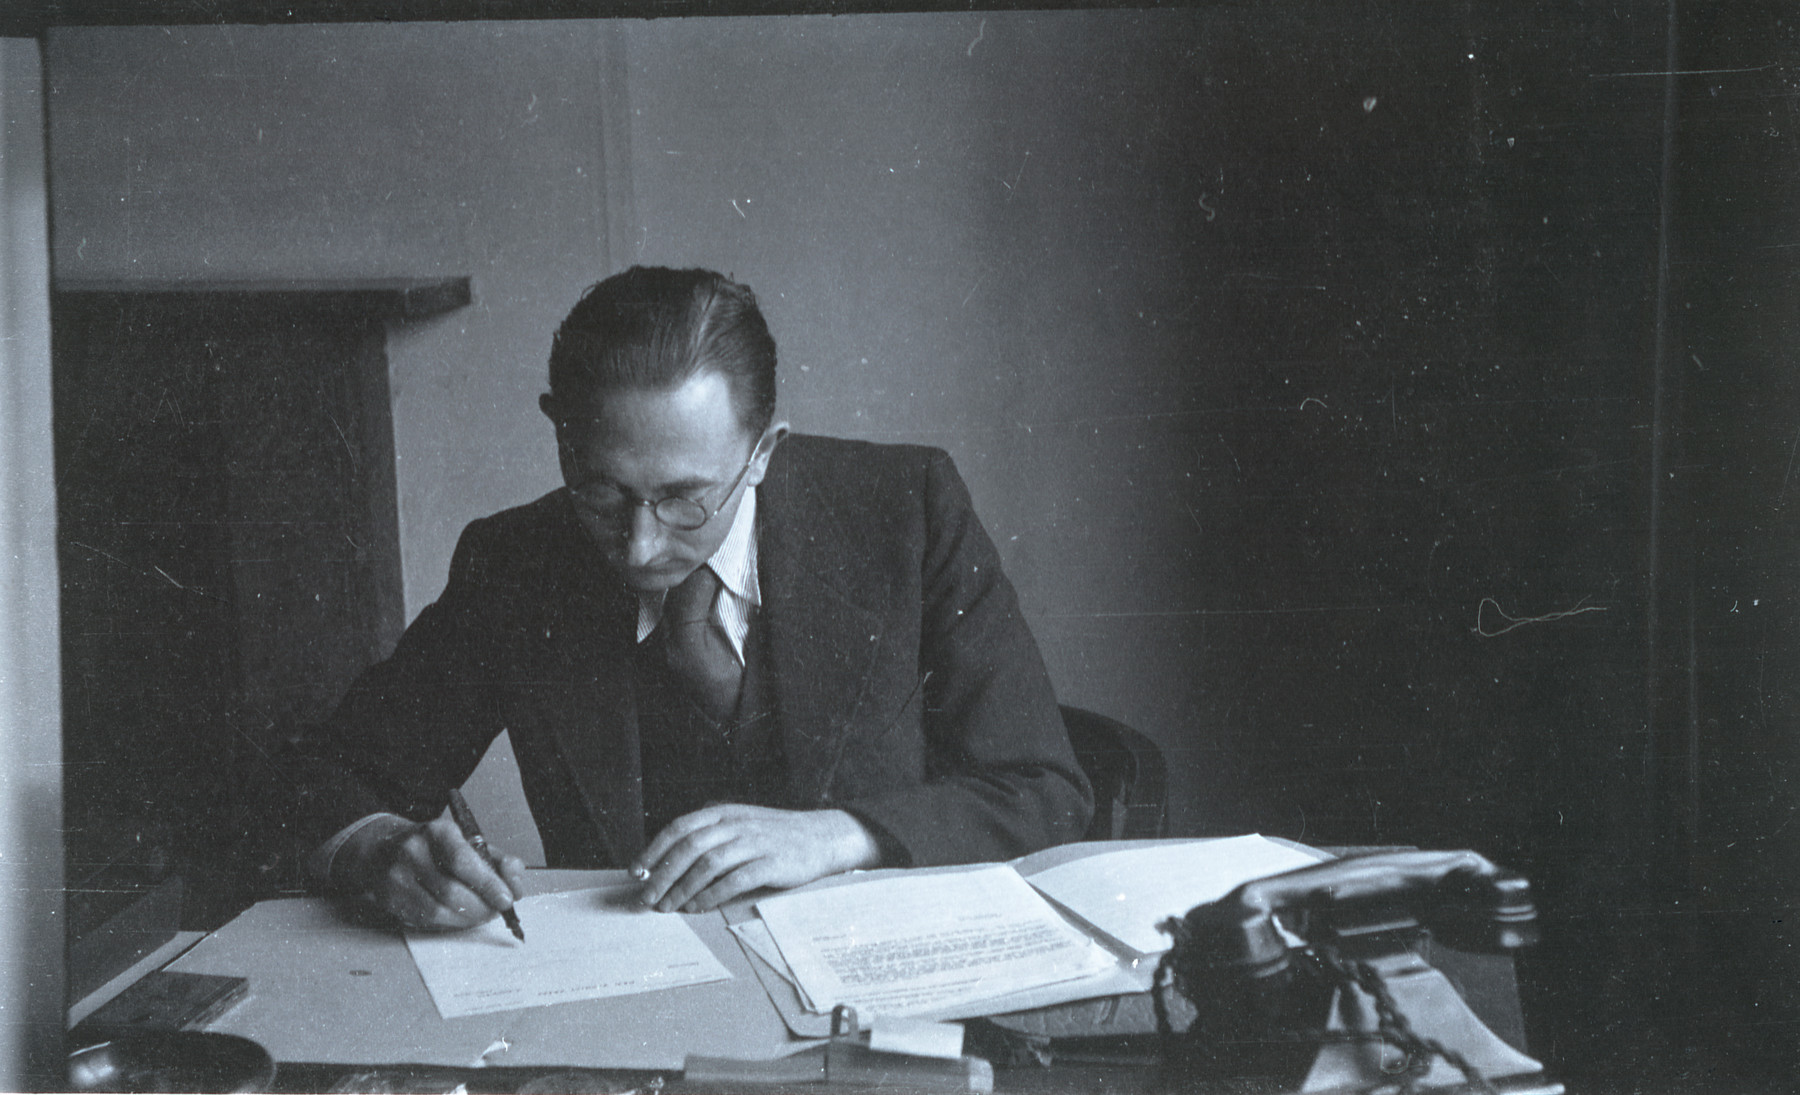 A member of the Revisionist Zionist organization in London works at his desk.